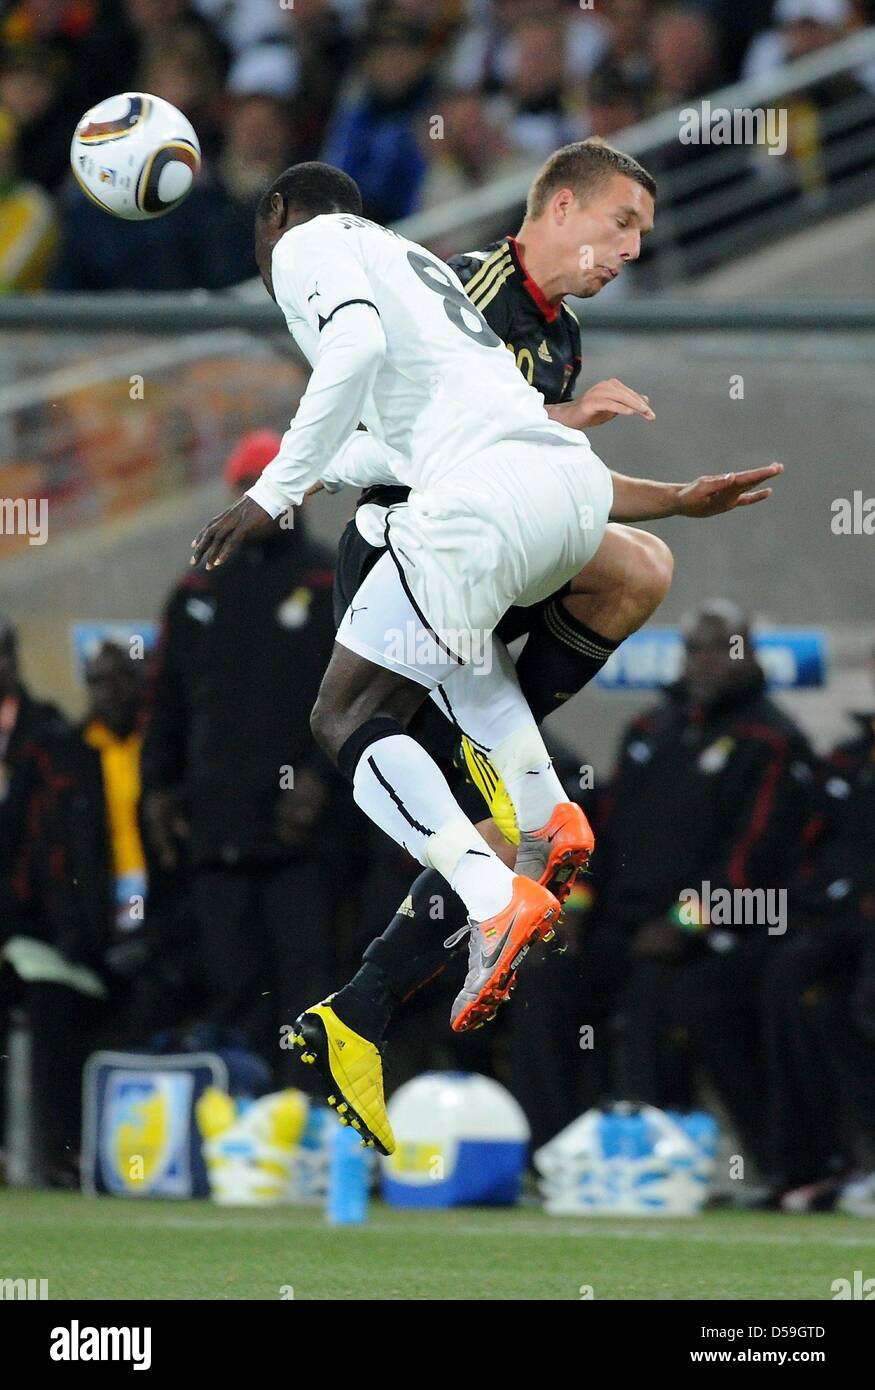 Germany's Lukas Podolski and Ghana's Jonathan Mensah vie for the ball during the 2010 FIFA World Cup group D match between Ghana and Germany at Soccer City, Johannesburg, South Africa 23 June 2010. Photo: Marcus Brandt dpa - Please refer to http://dpaq.de/FIFA-WM2010-TC Stock Photo